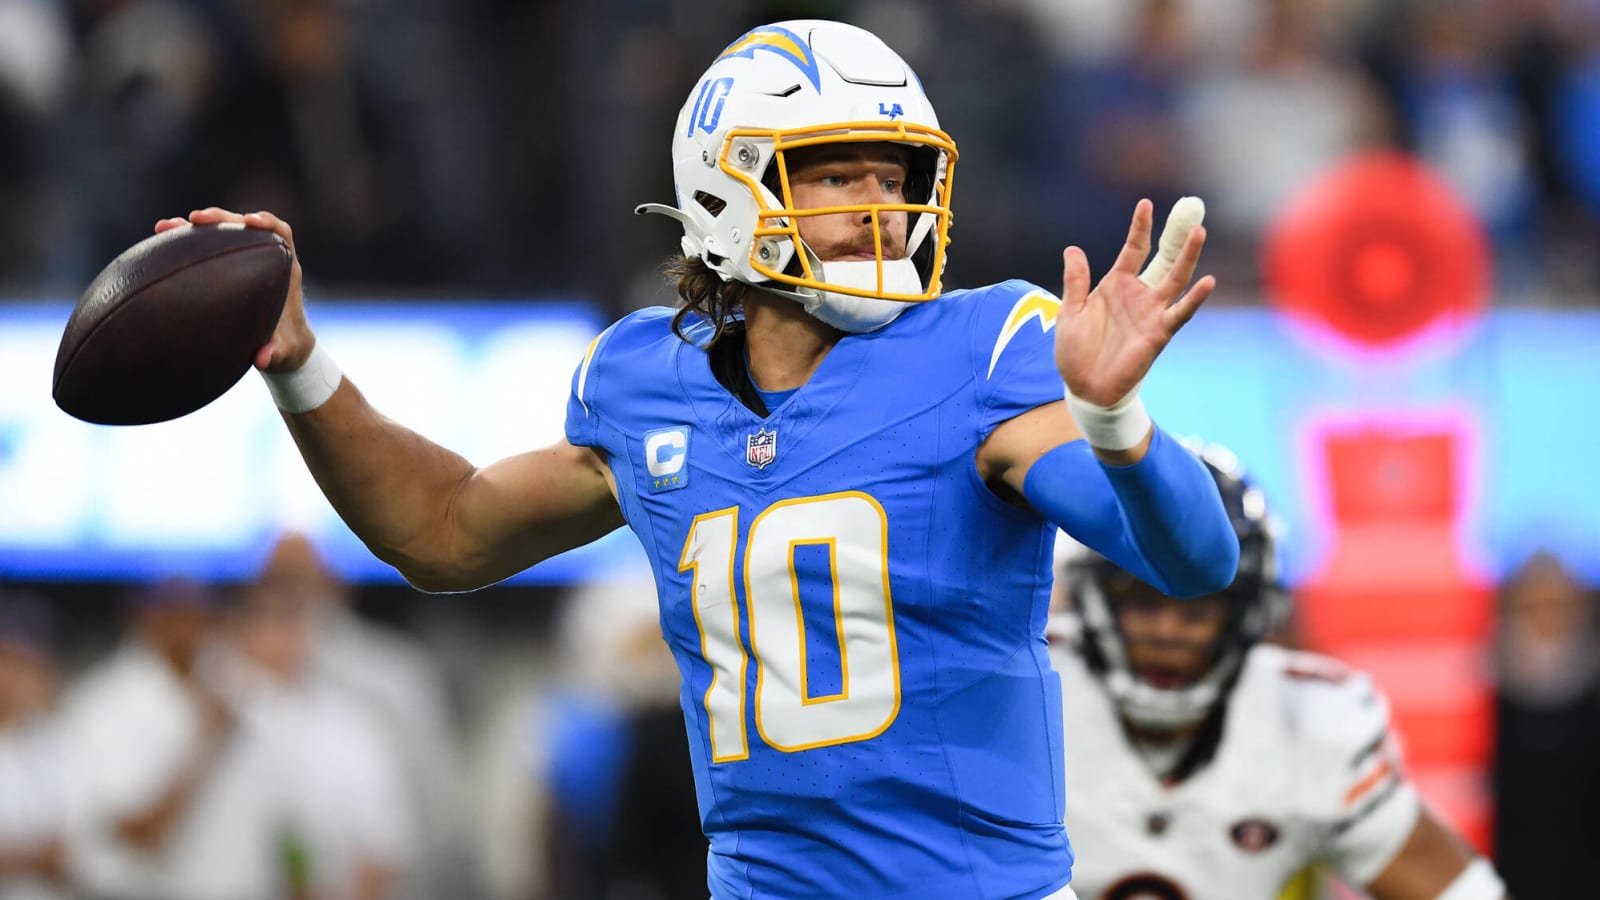 NFL &#39;MNF&#39; Week 9: New York Jets vs. Los Angeles Chargers betting picks and preview